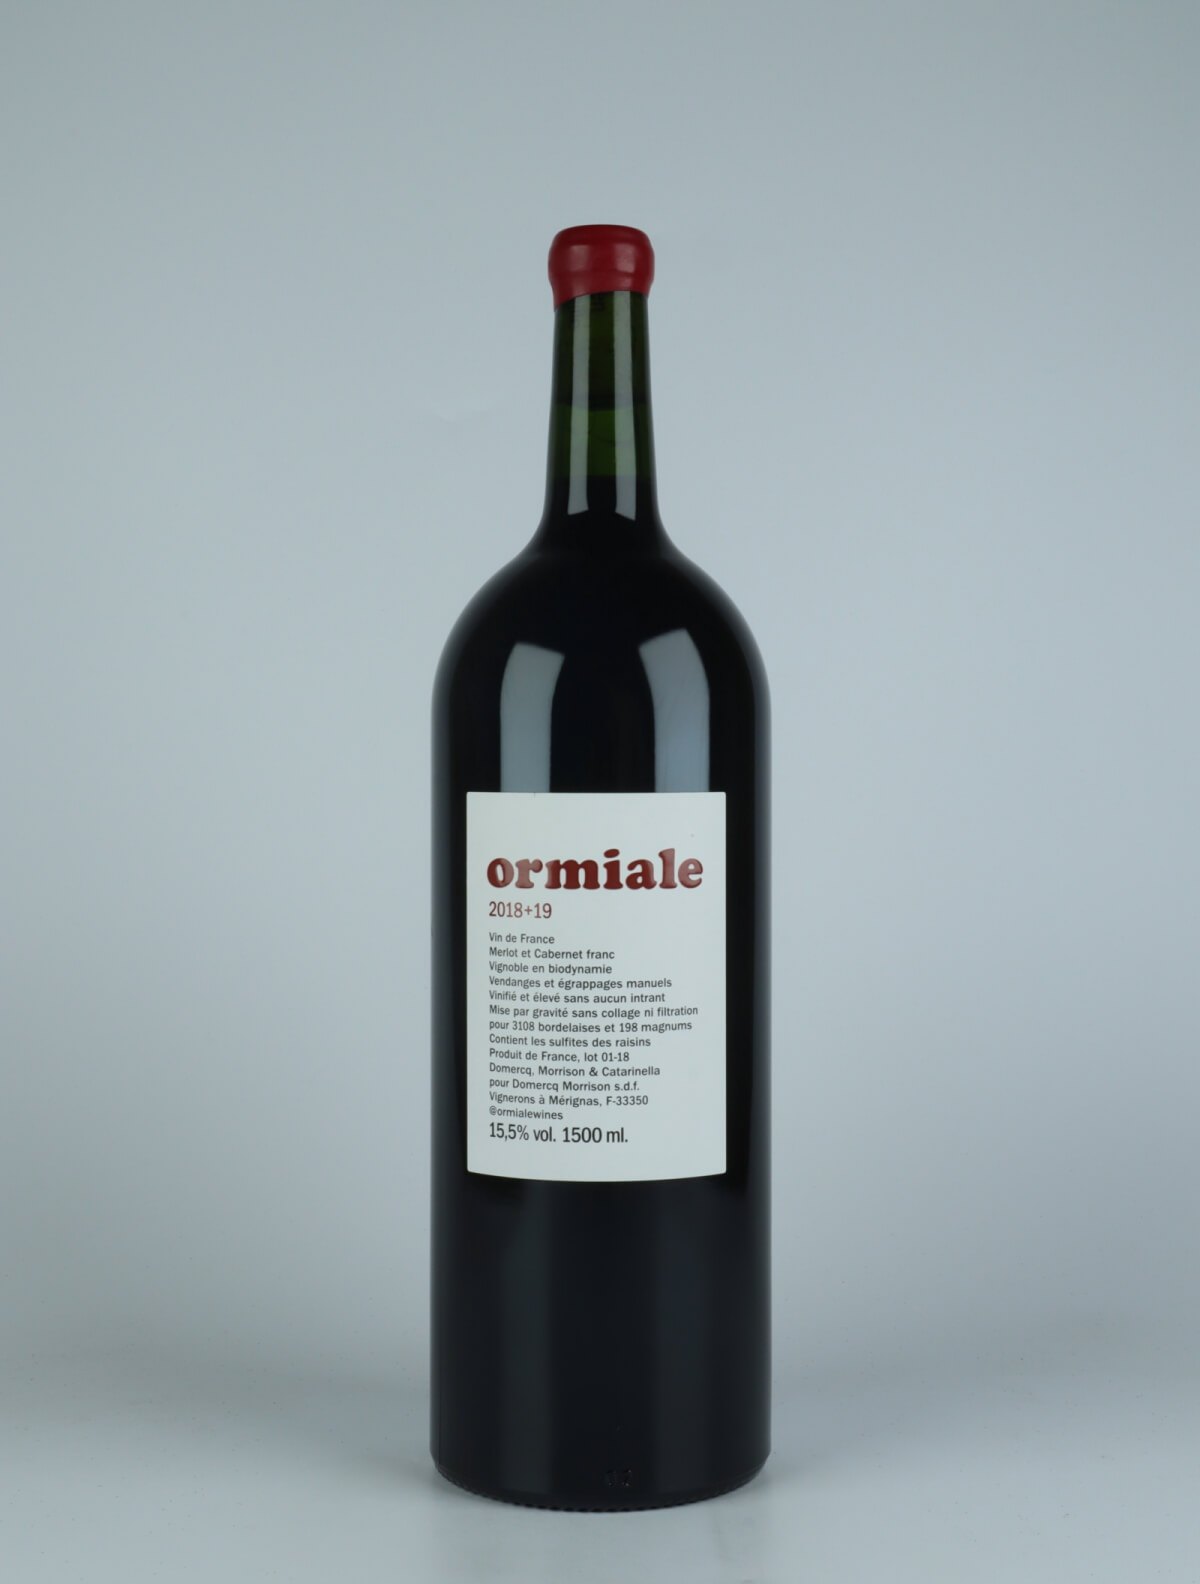 A bottle N.V. Ormiale (18+19) - Magnum Red wine from Ormiale, Bordeaux in France